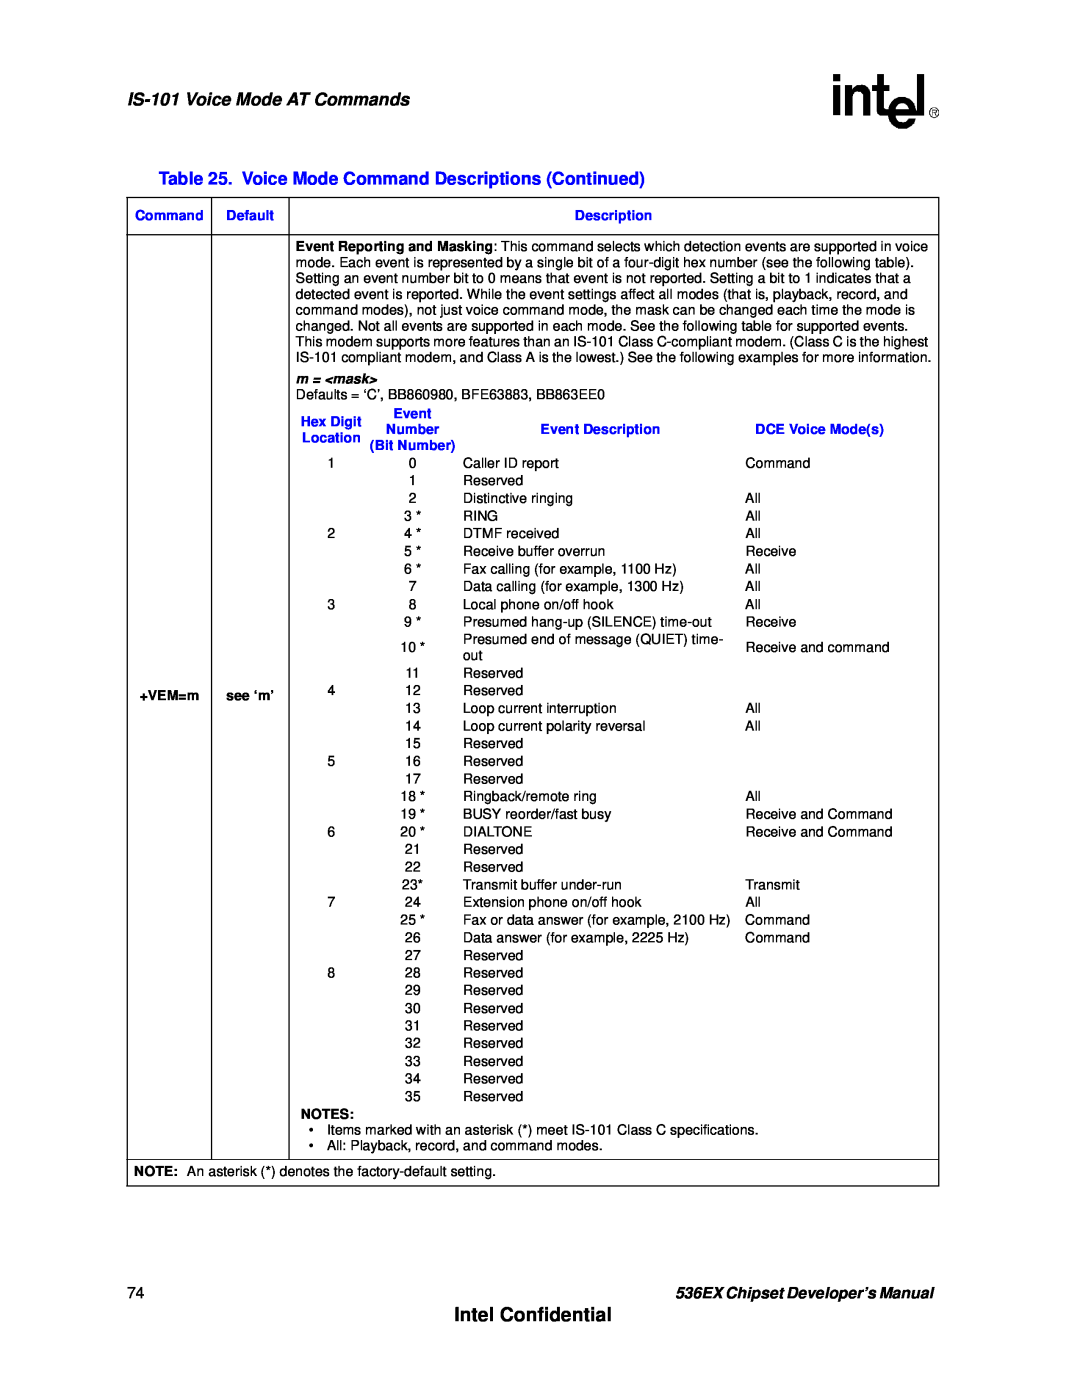 Intel 536EX manual Intel Confidential, IS-101Voice Mode AT Commands, m = <mask>, +VEM=m, see ‘m’, Notes 